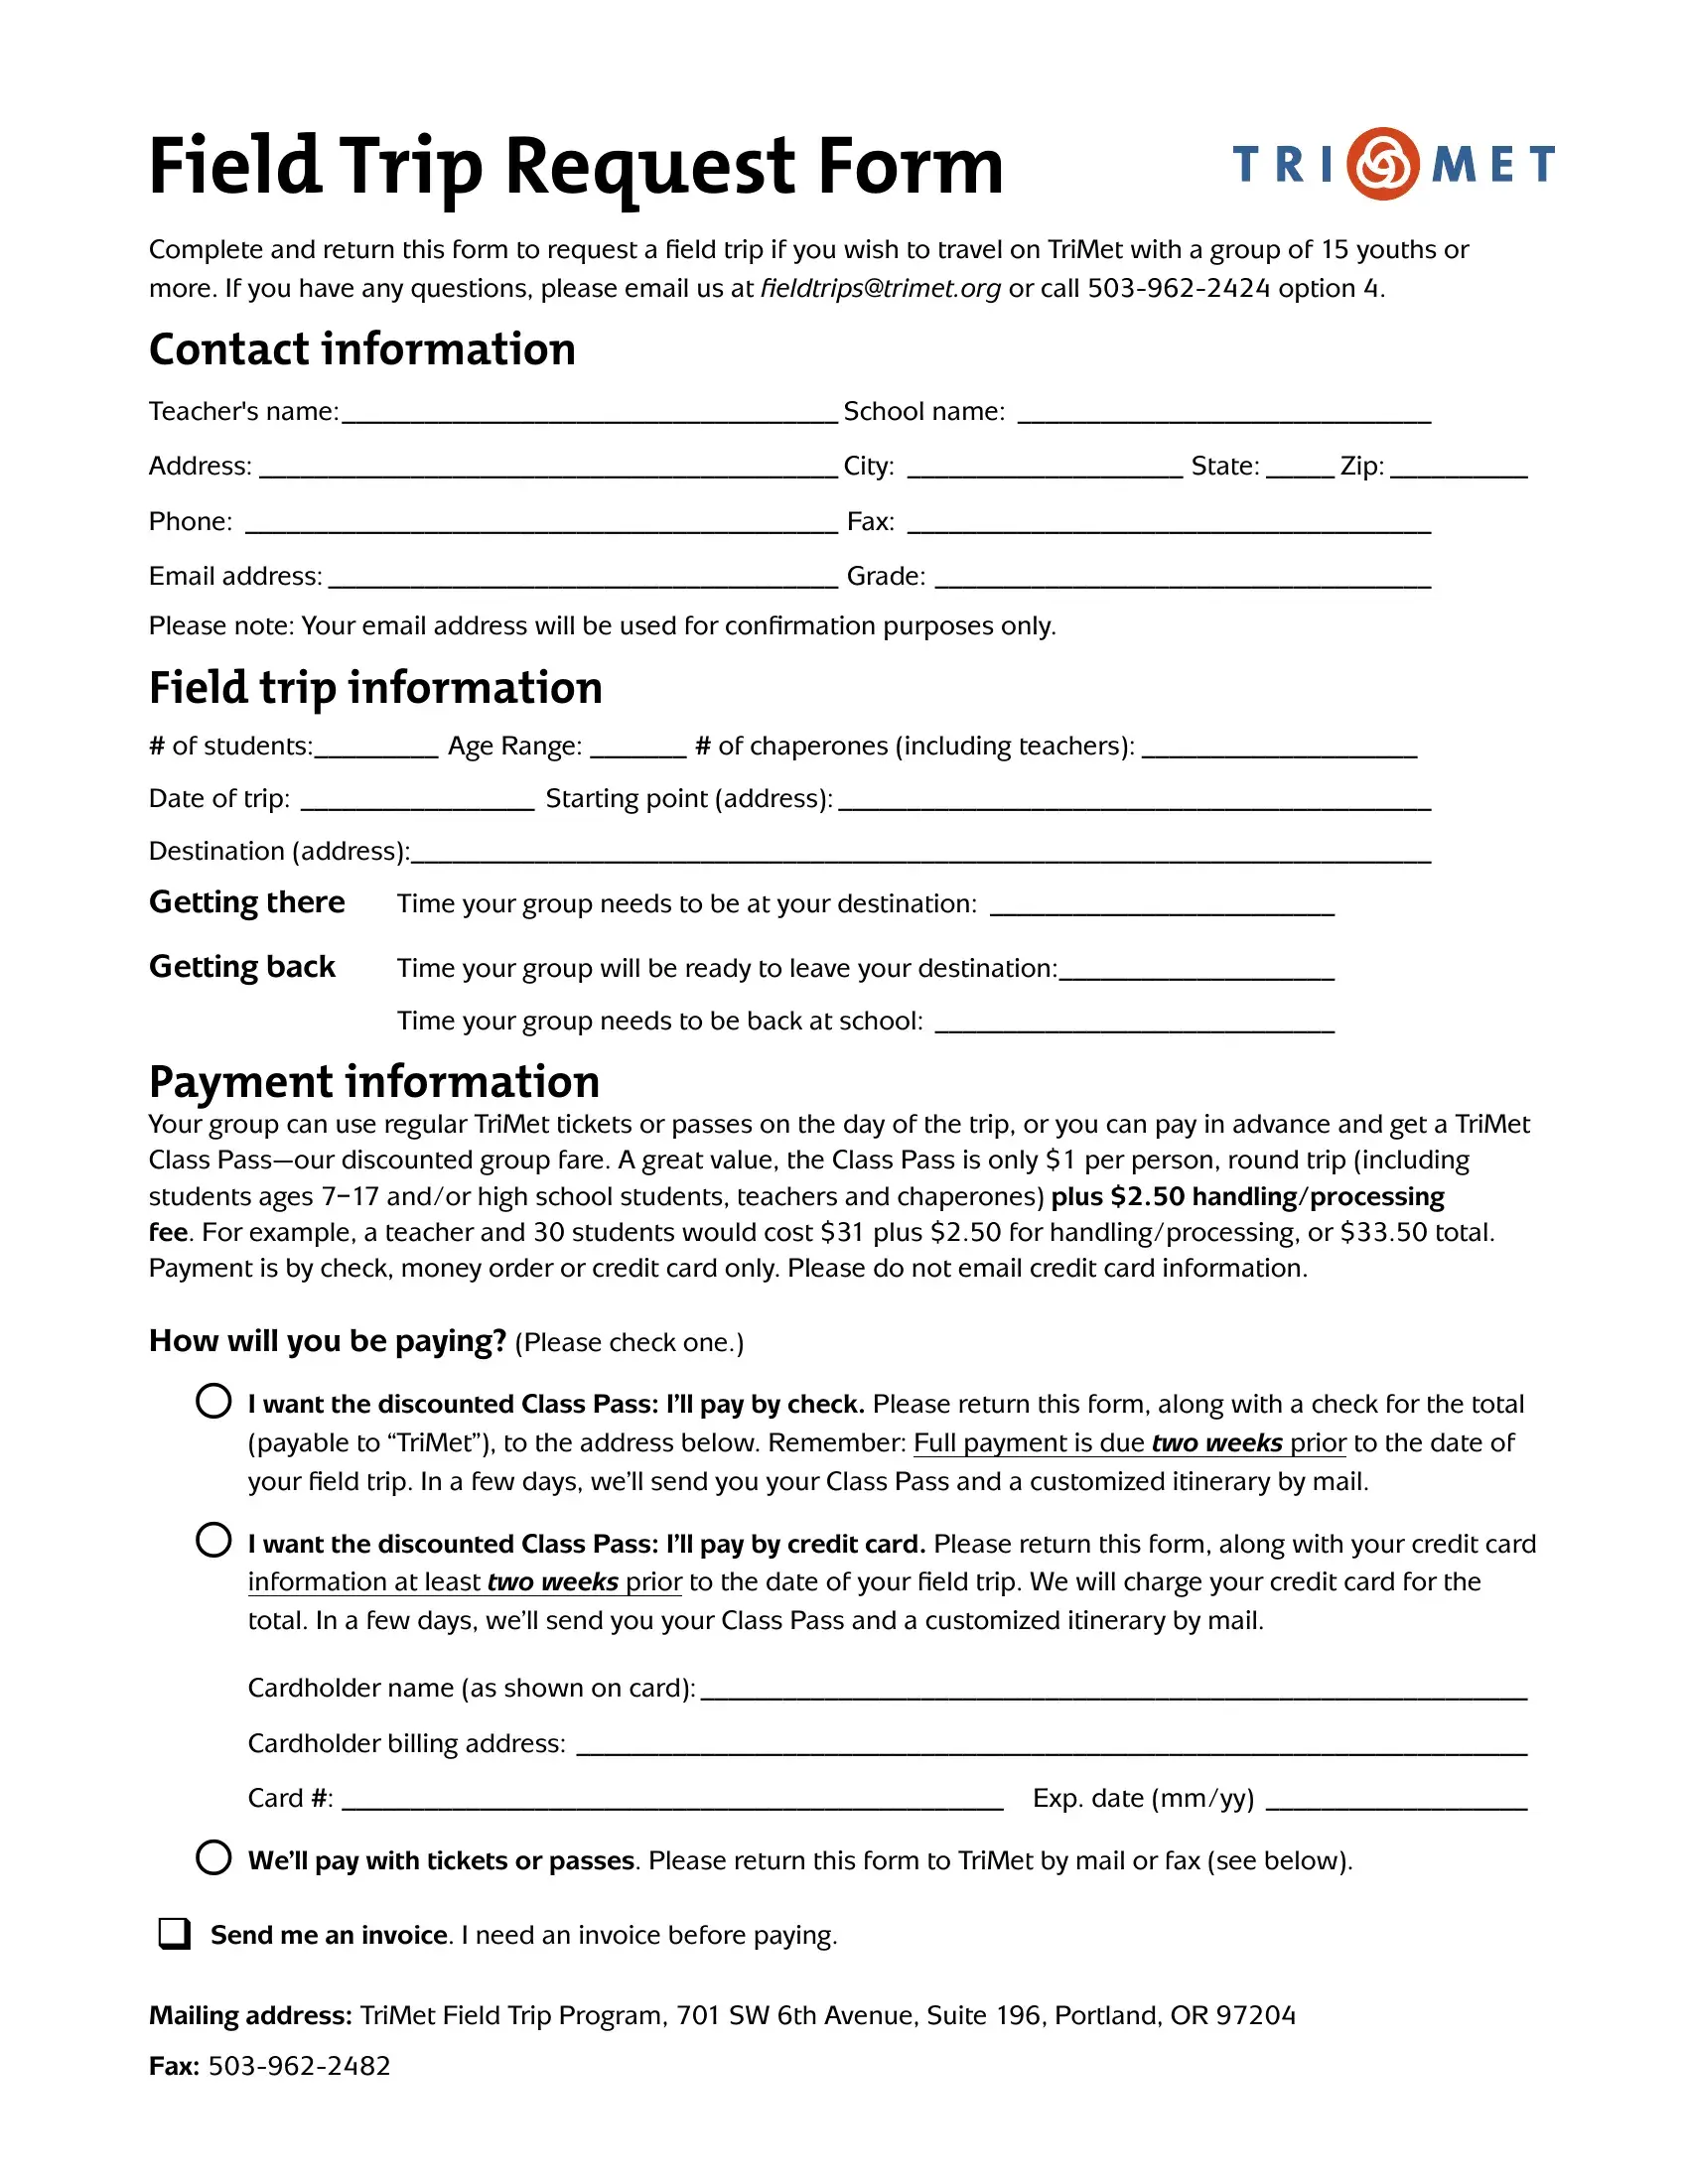 field-trip-request-form-fill-out-printable-pdf-forms-online